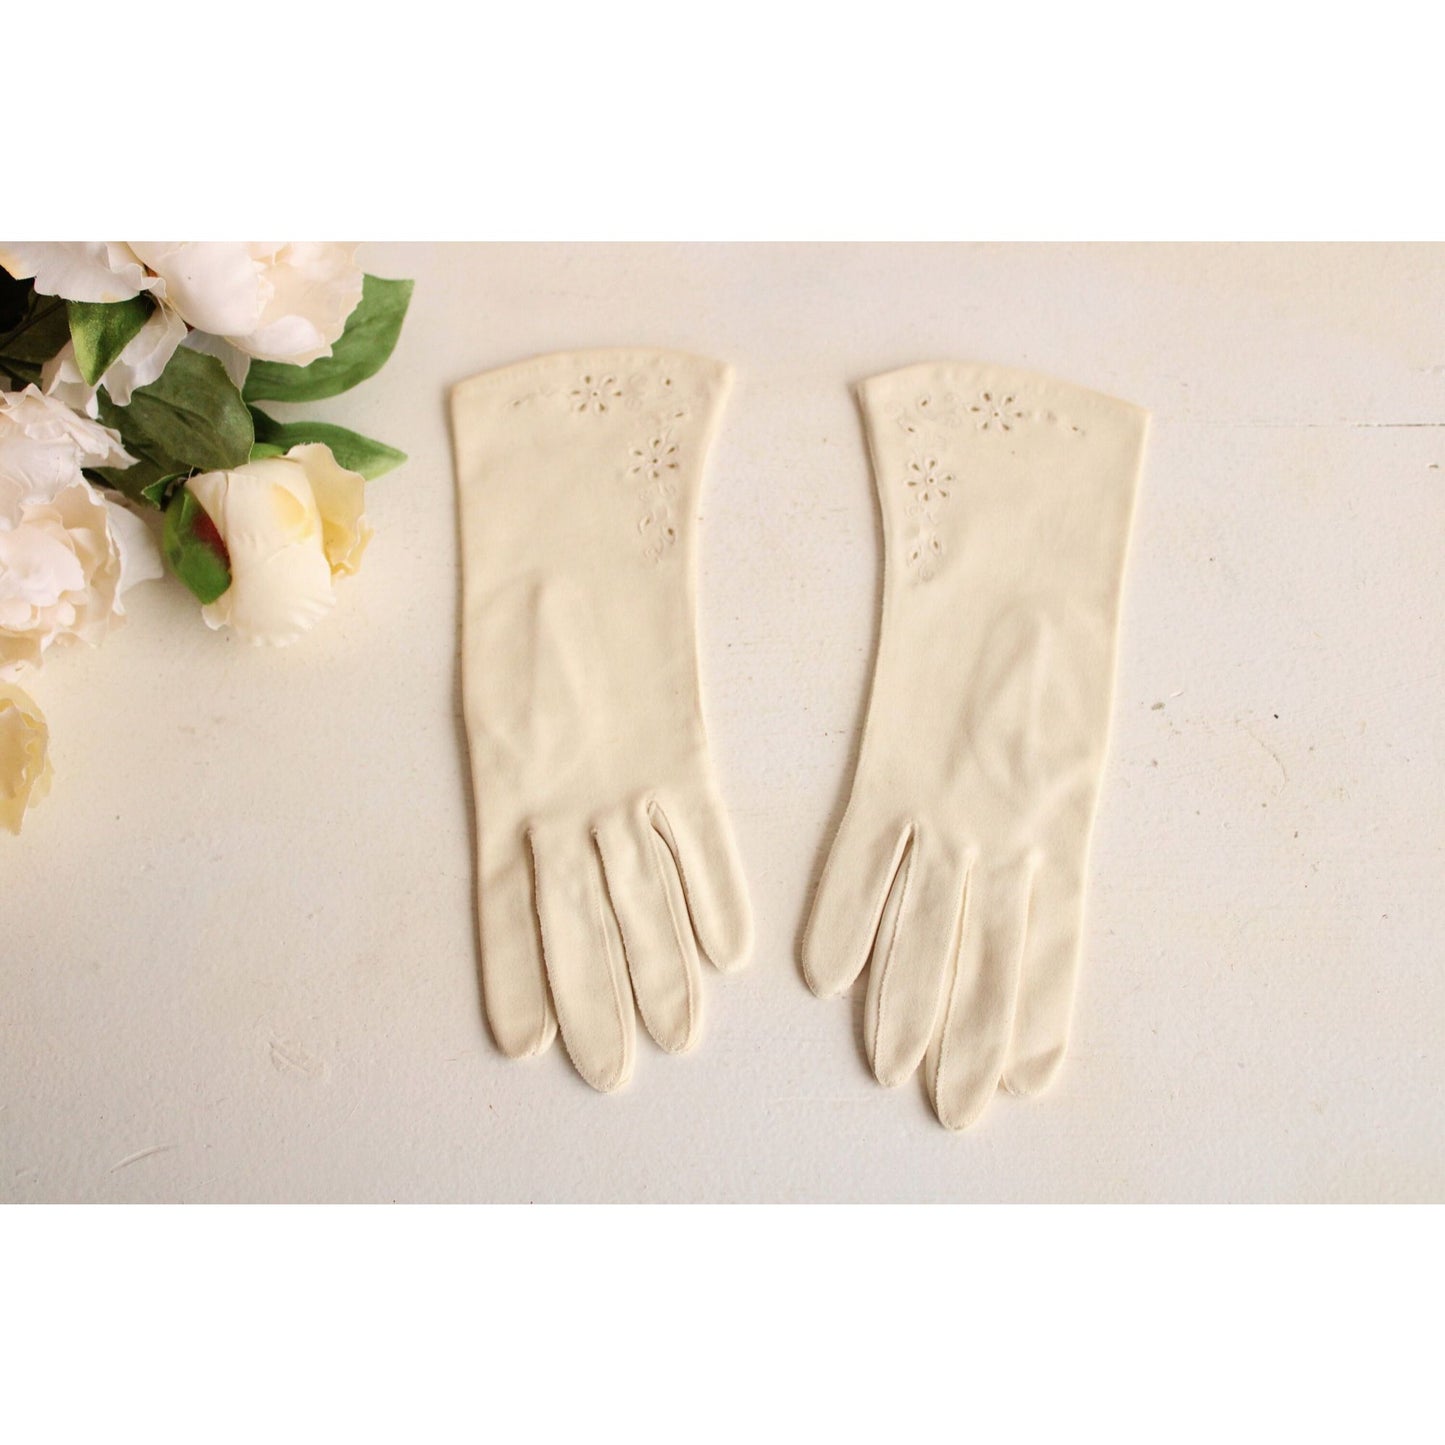 Vintage 1950s 1960s Aris Gloves Size 6 1/2 in Embroidered Ivory Cotton